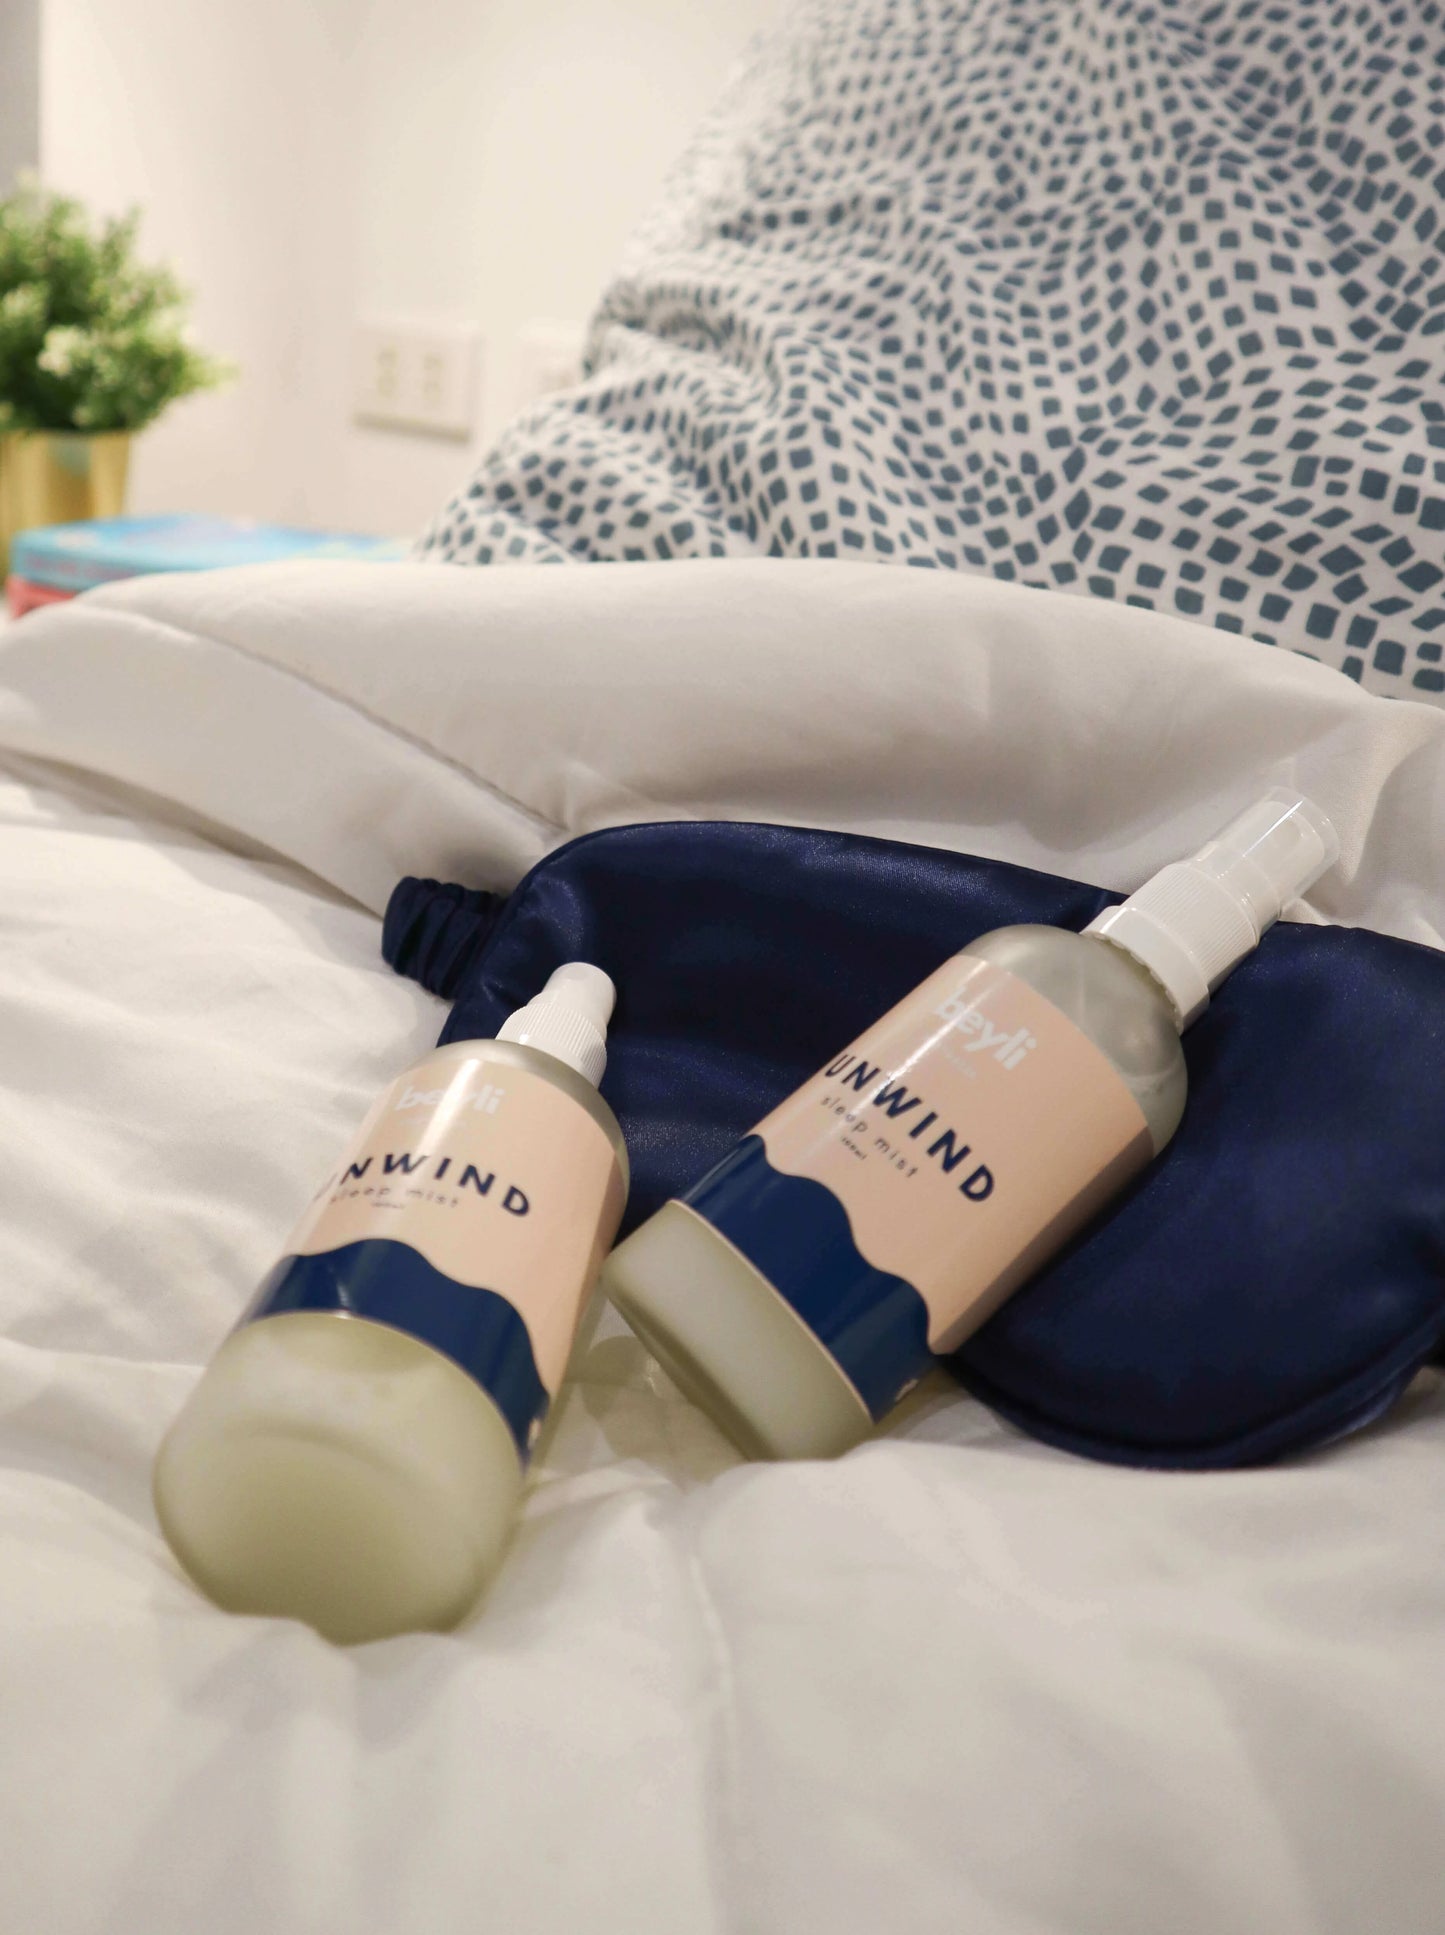 A pair of Better Sleep lotions next to a soft pillow to promote relaxation